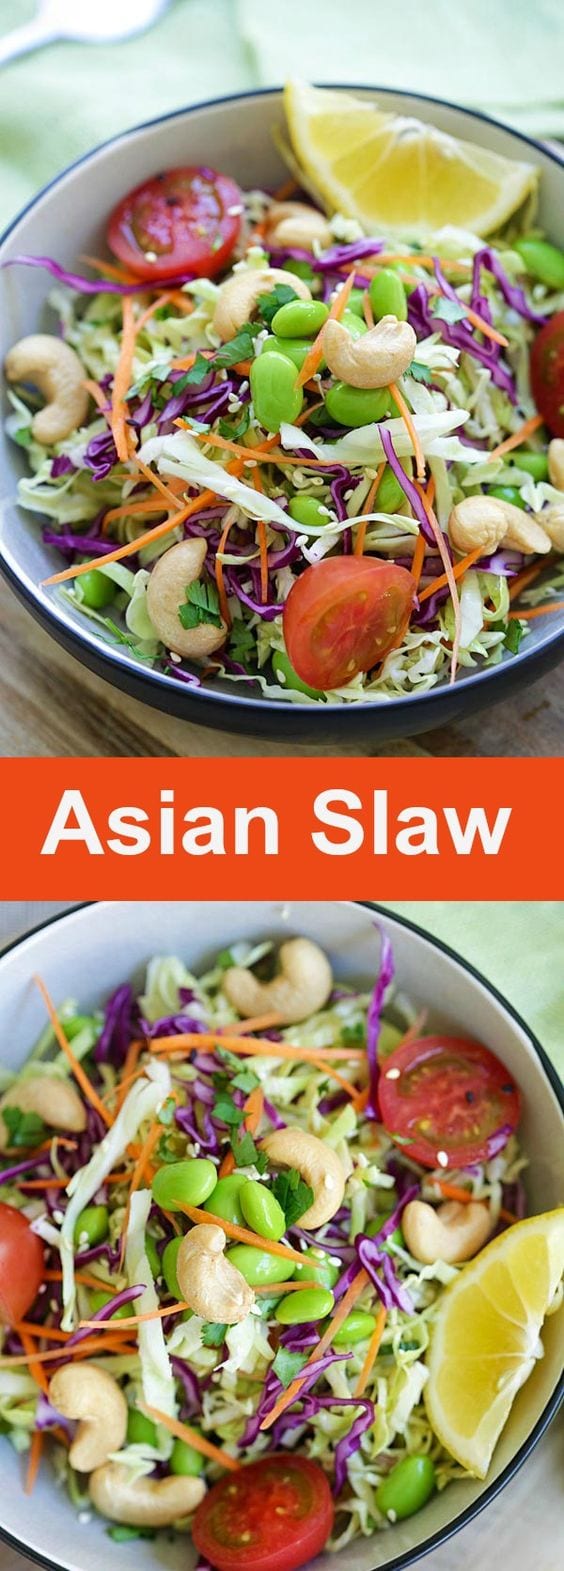 Asian Slaw - delicious Asian slaw recipe with soy sesame dressing. It's easy, low calories and refreshing. Healthy salad for the entire family | rasamalaysia.com